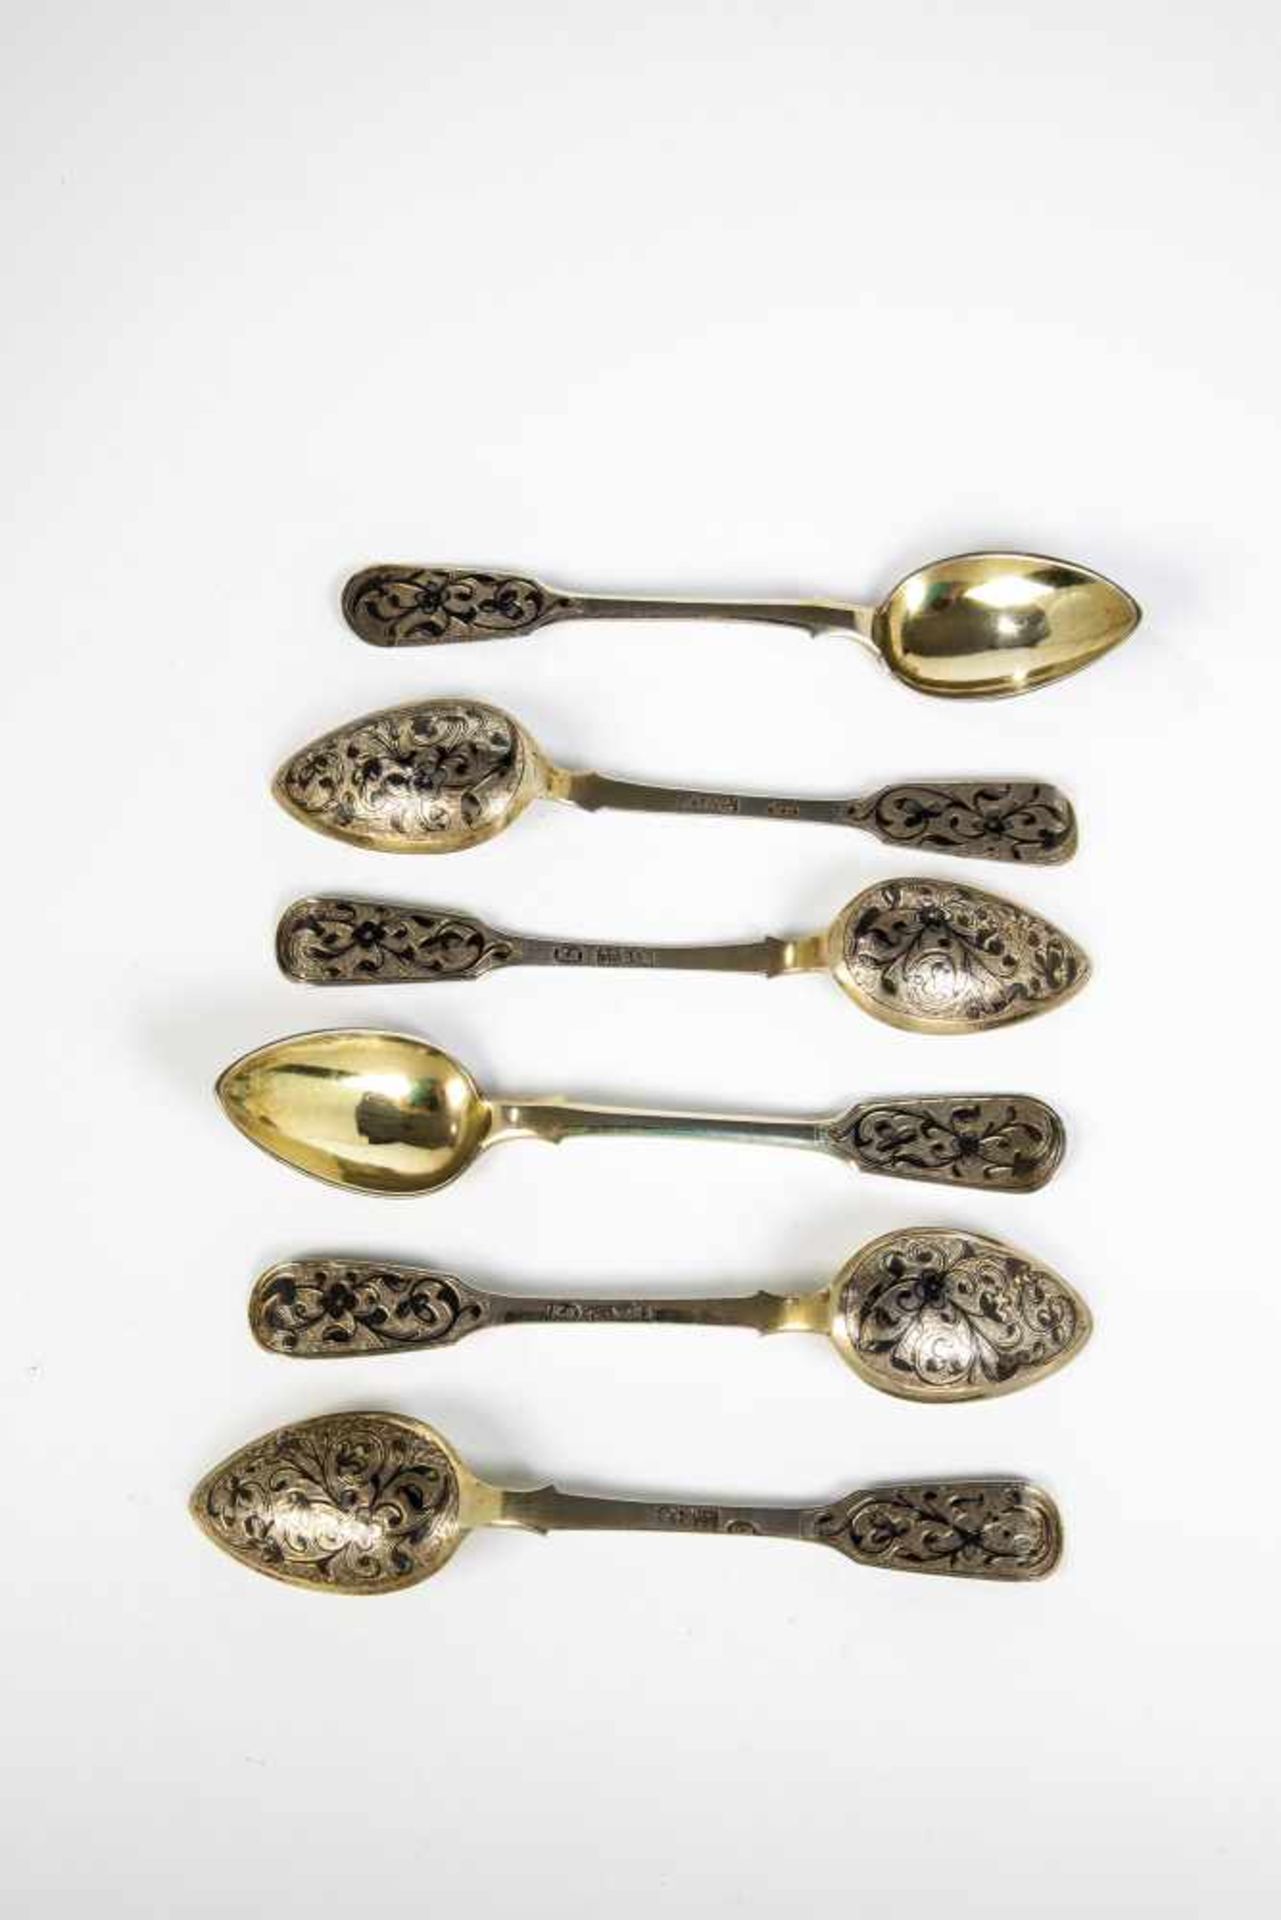 Six gilded-silver and niello spoons. Russia, Moscow, 1861. Stamped allmark, 84-standard,assayer's